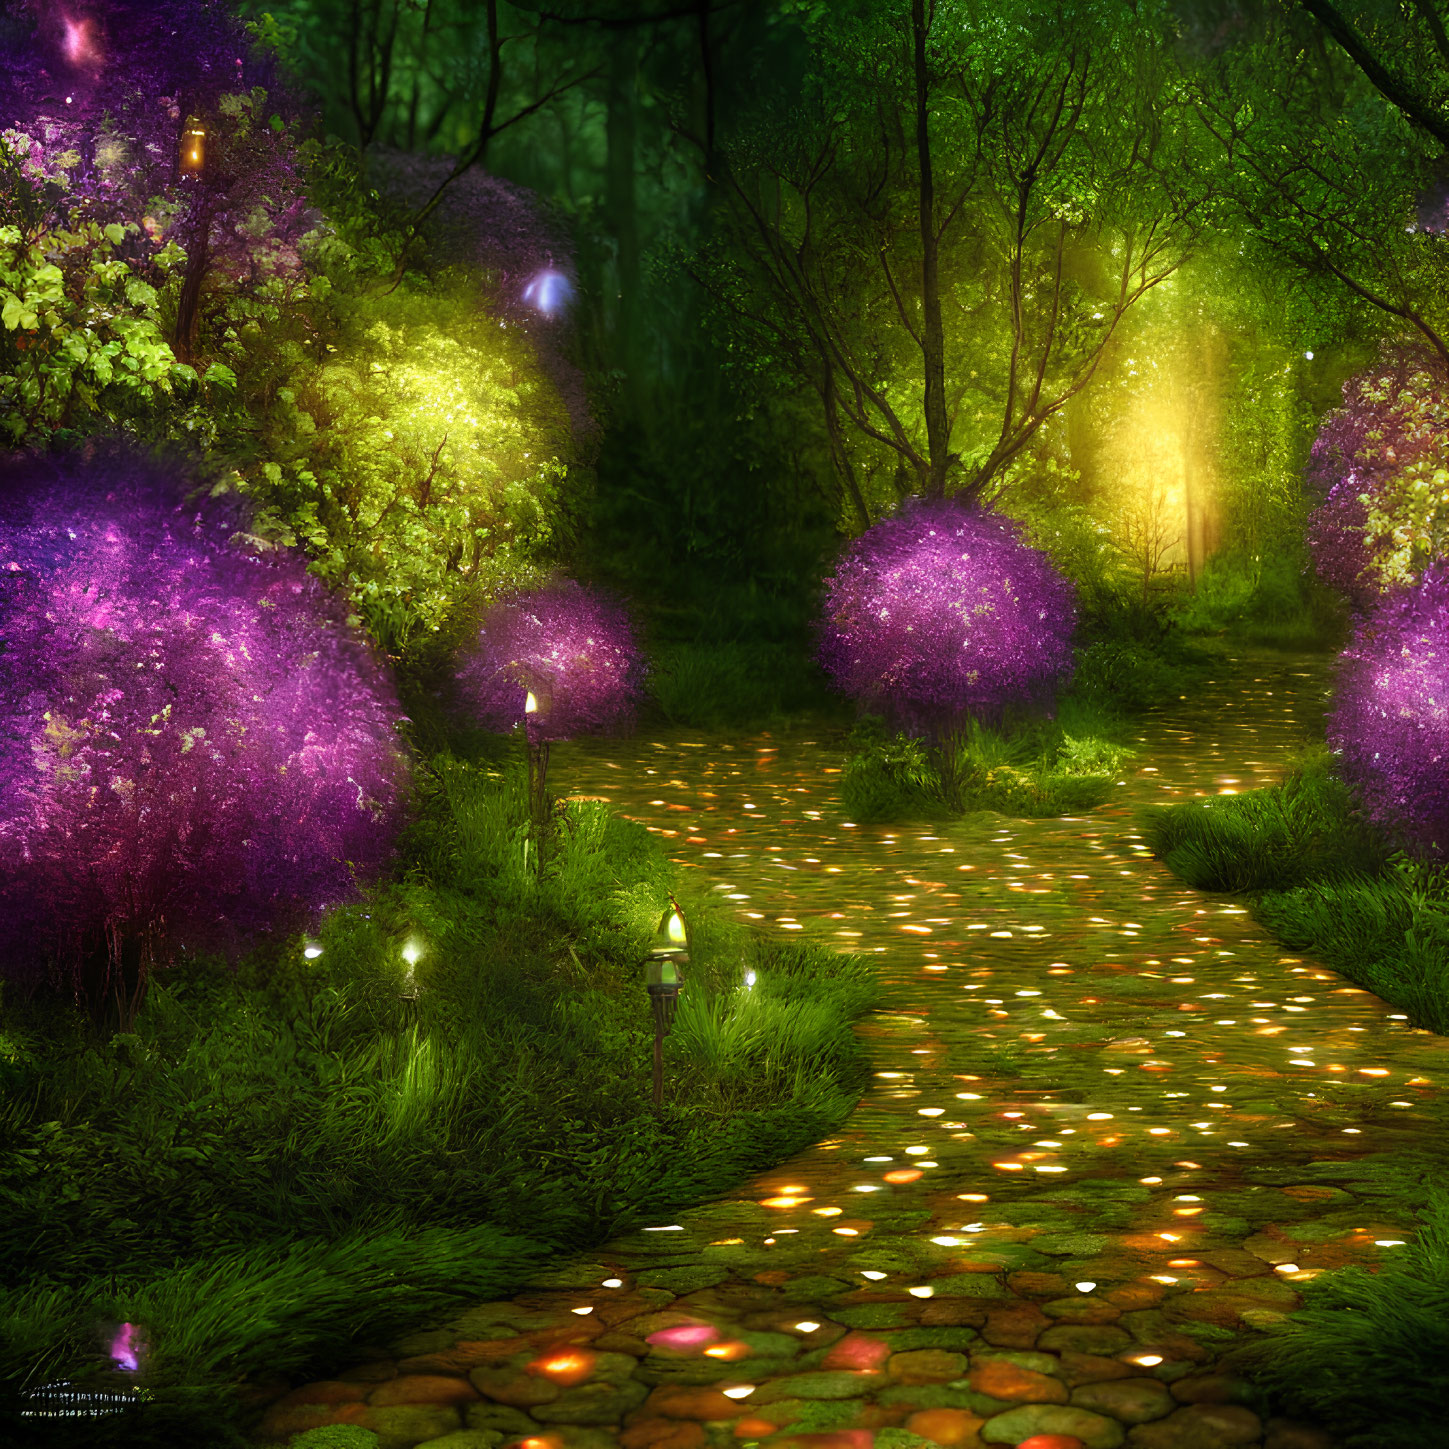 Enchanting forest pathway with glowing stones and purple flowers